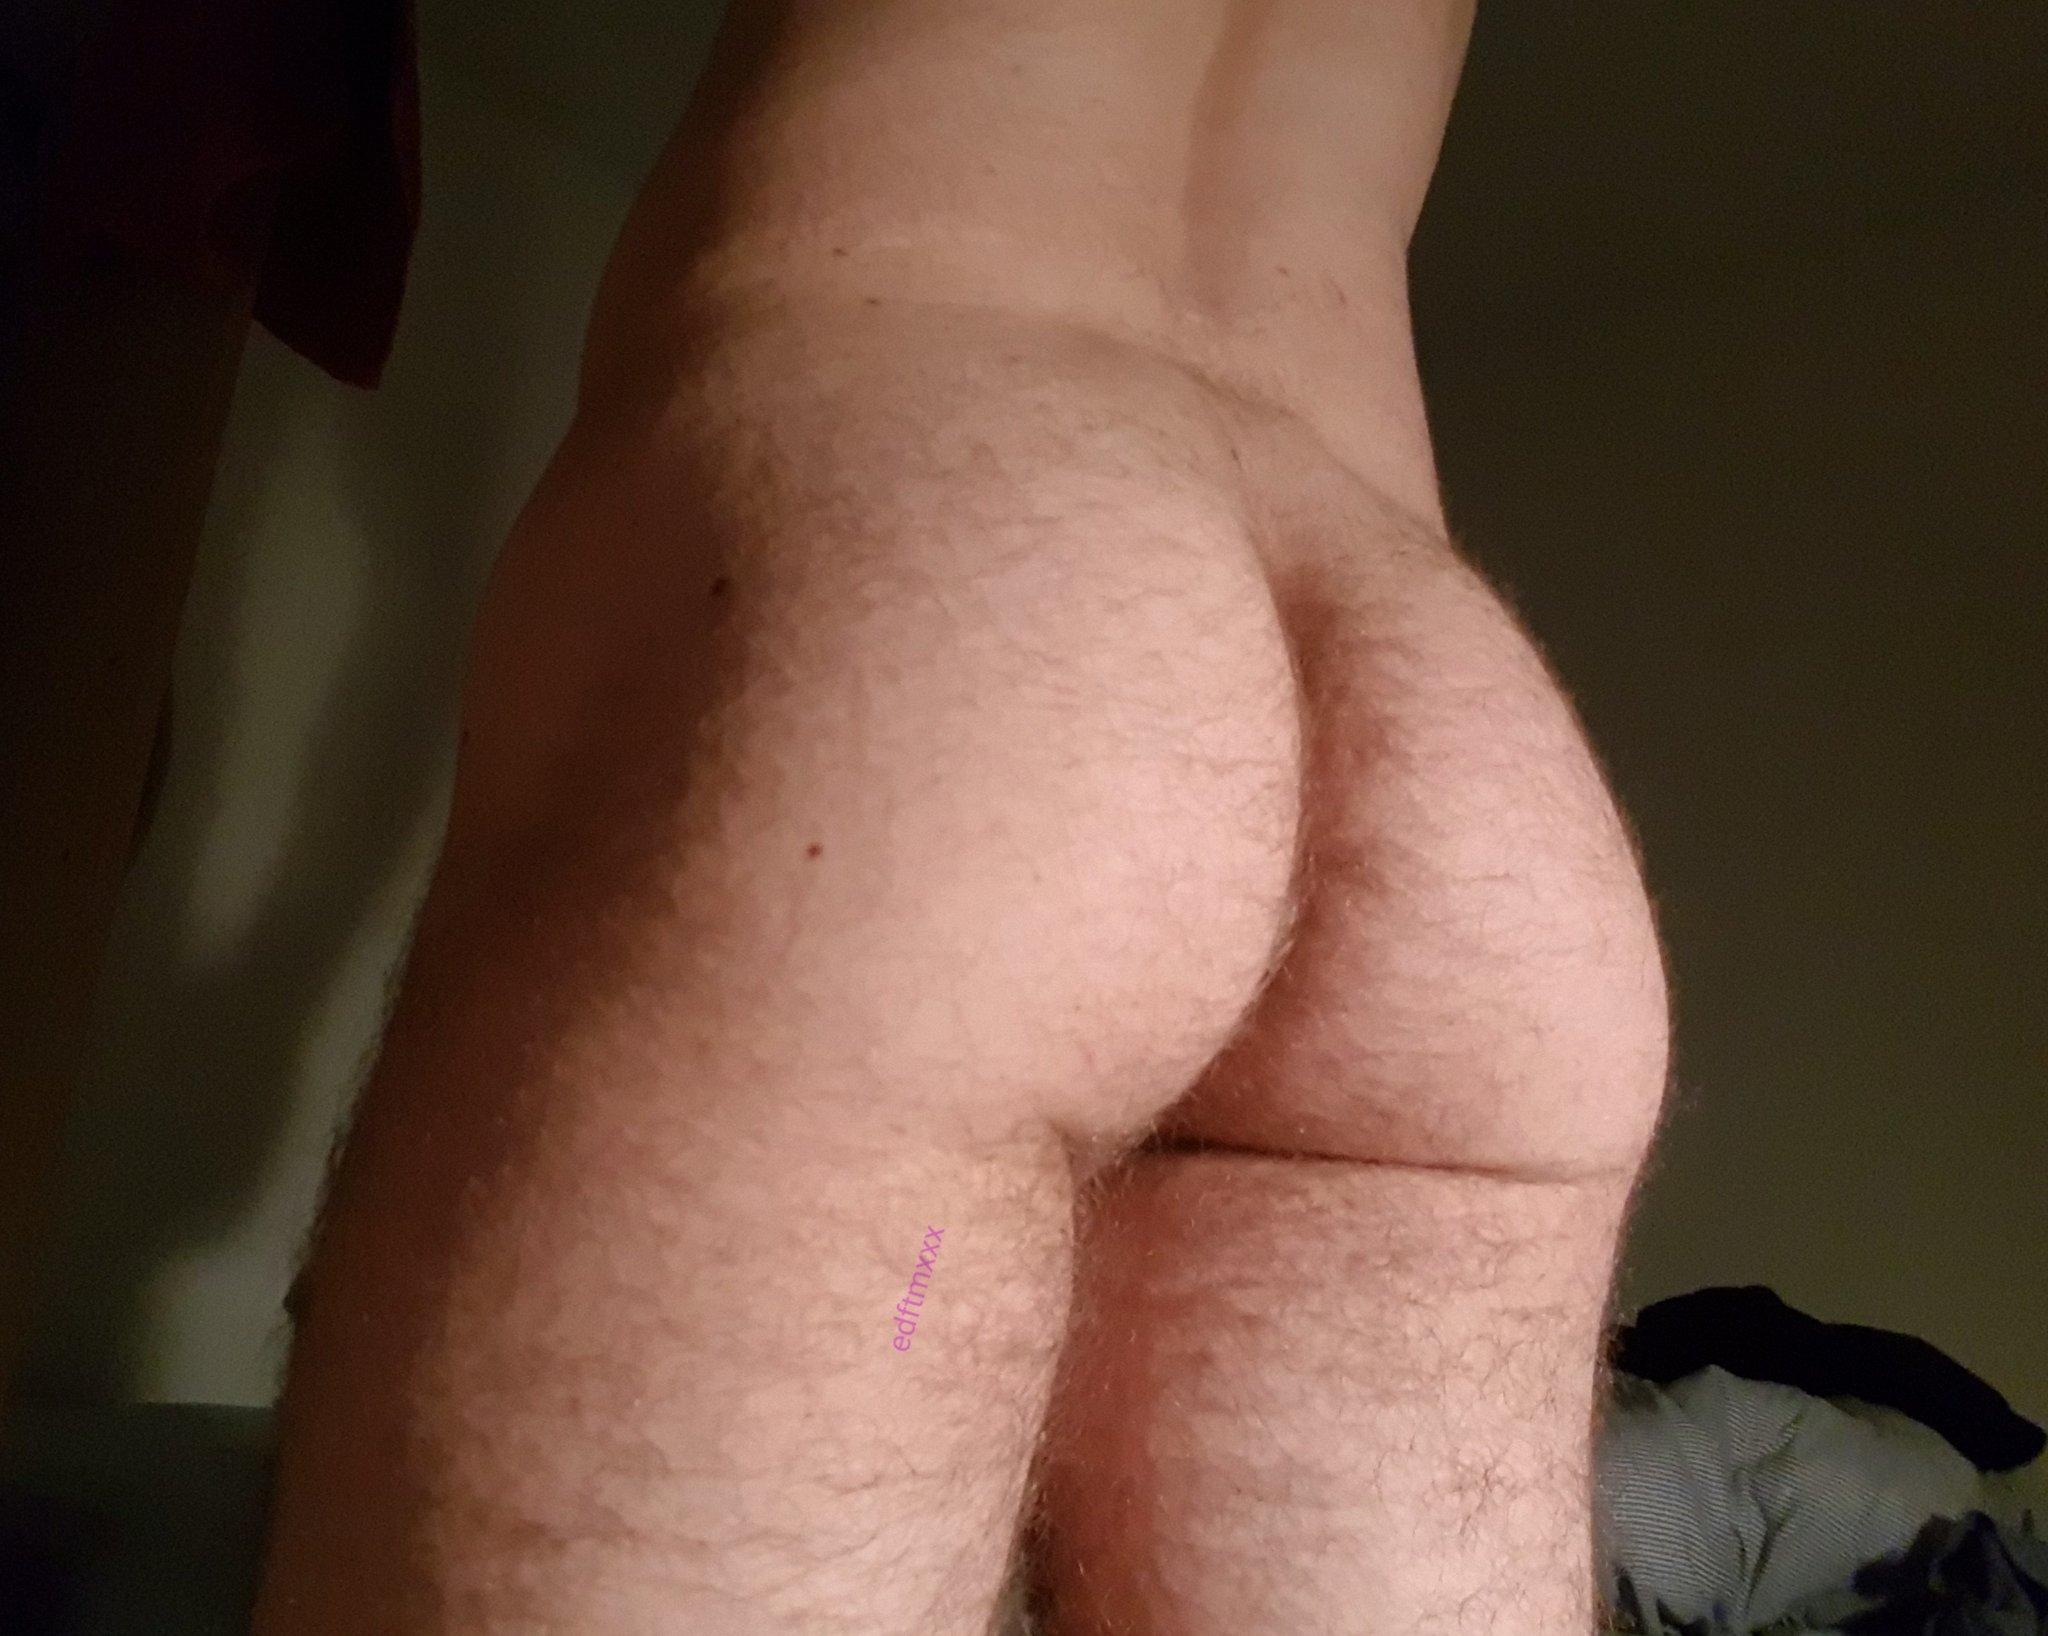 “Wondering if I should shave my ass or keep it hairy🍑

htt...